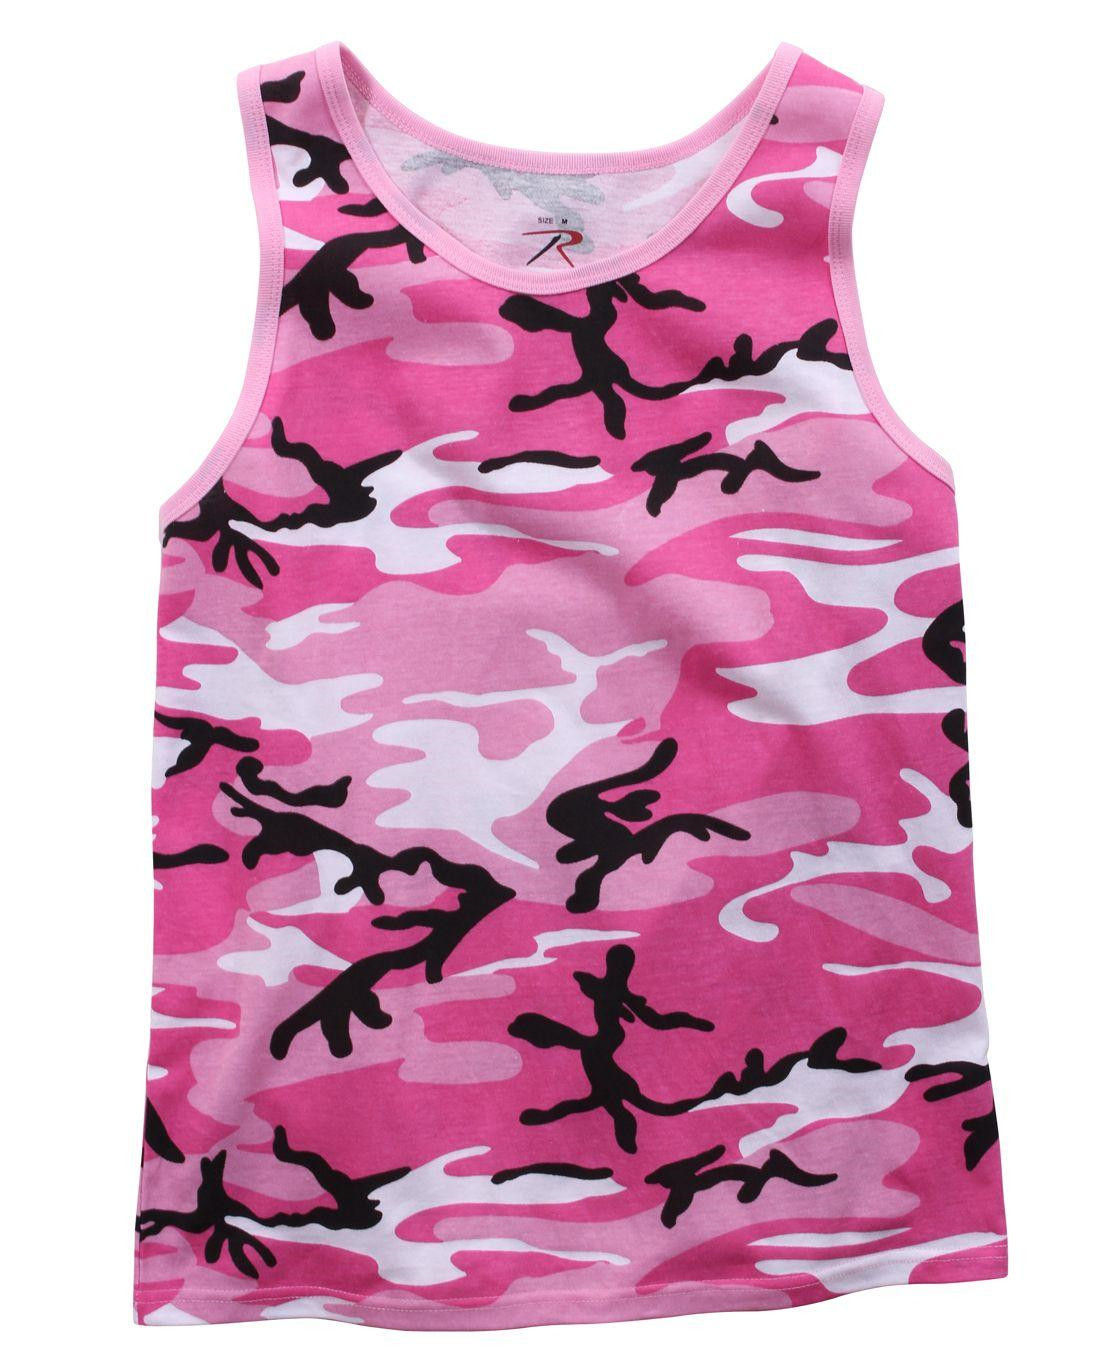 Adult Digital Camo or Solid Pattern Tank Tops Rothco Men's Tank Tops